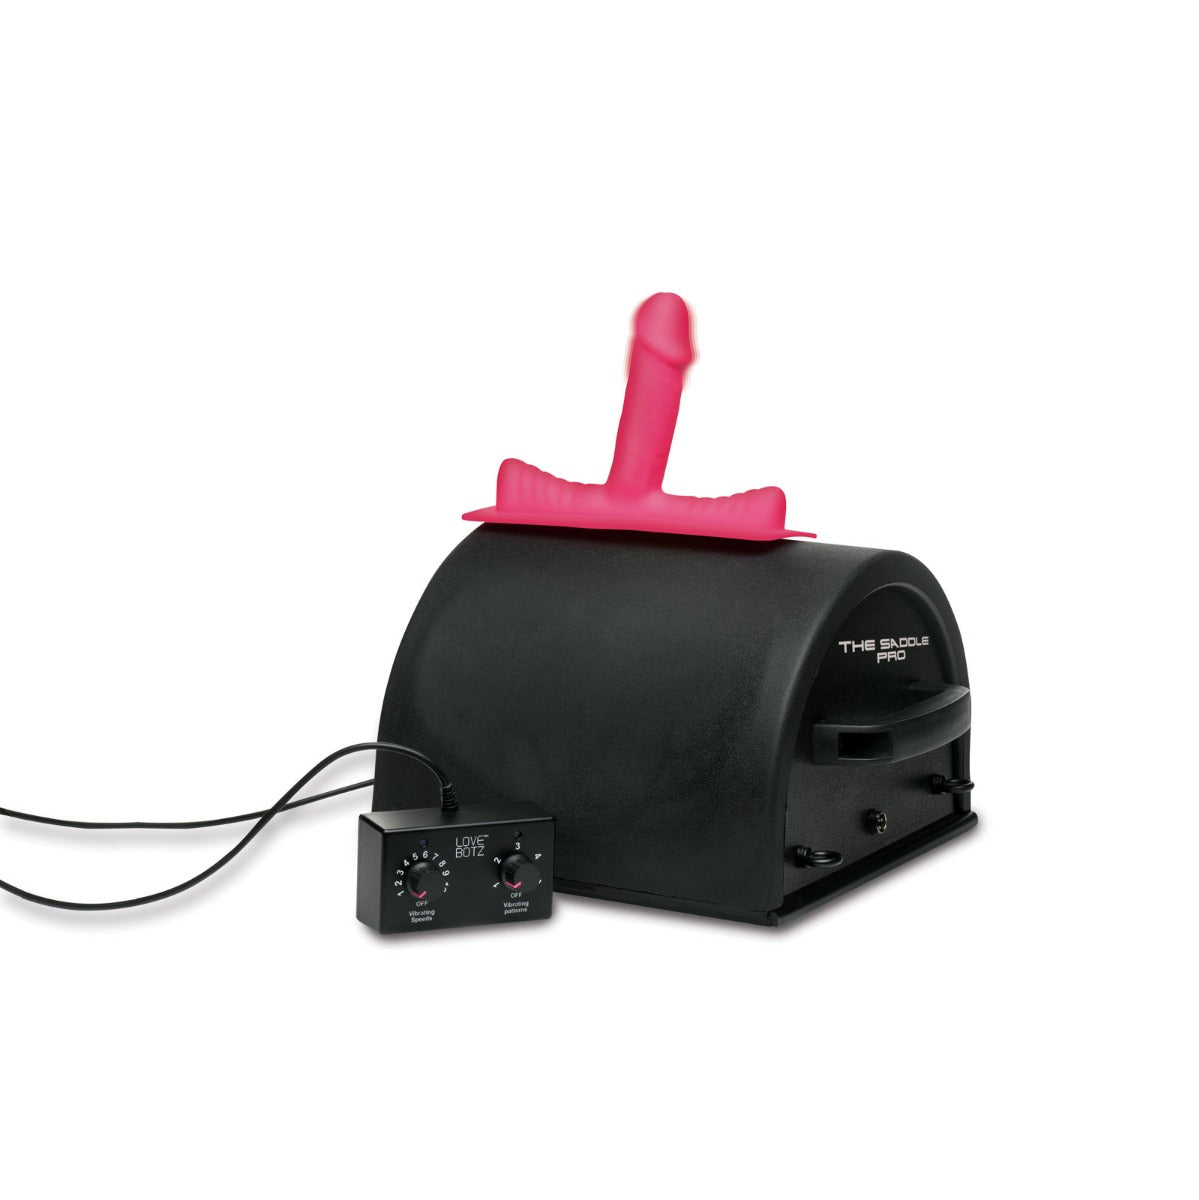 LOVEBOTZ Saddle Ultimate Sex Machine With 4 Silicone Attachments